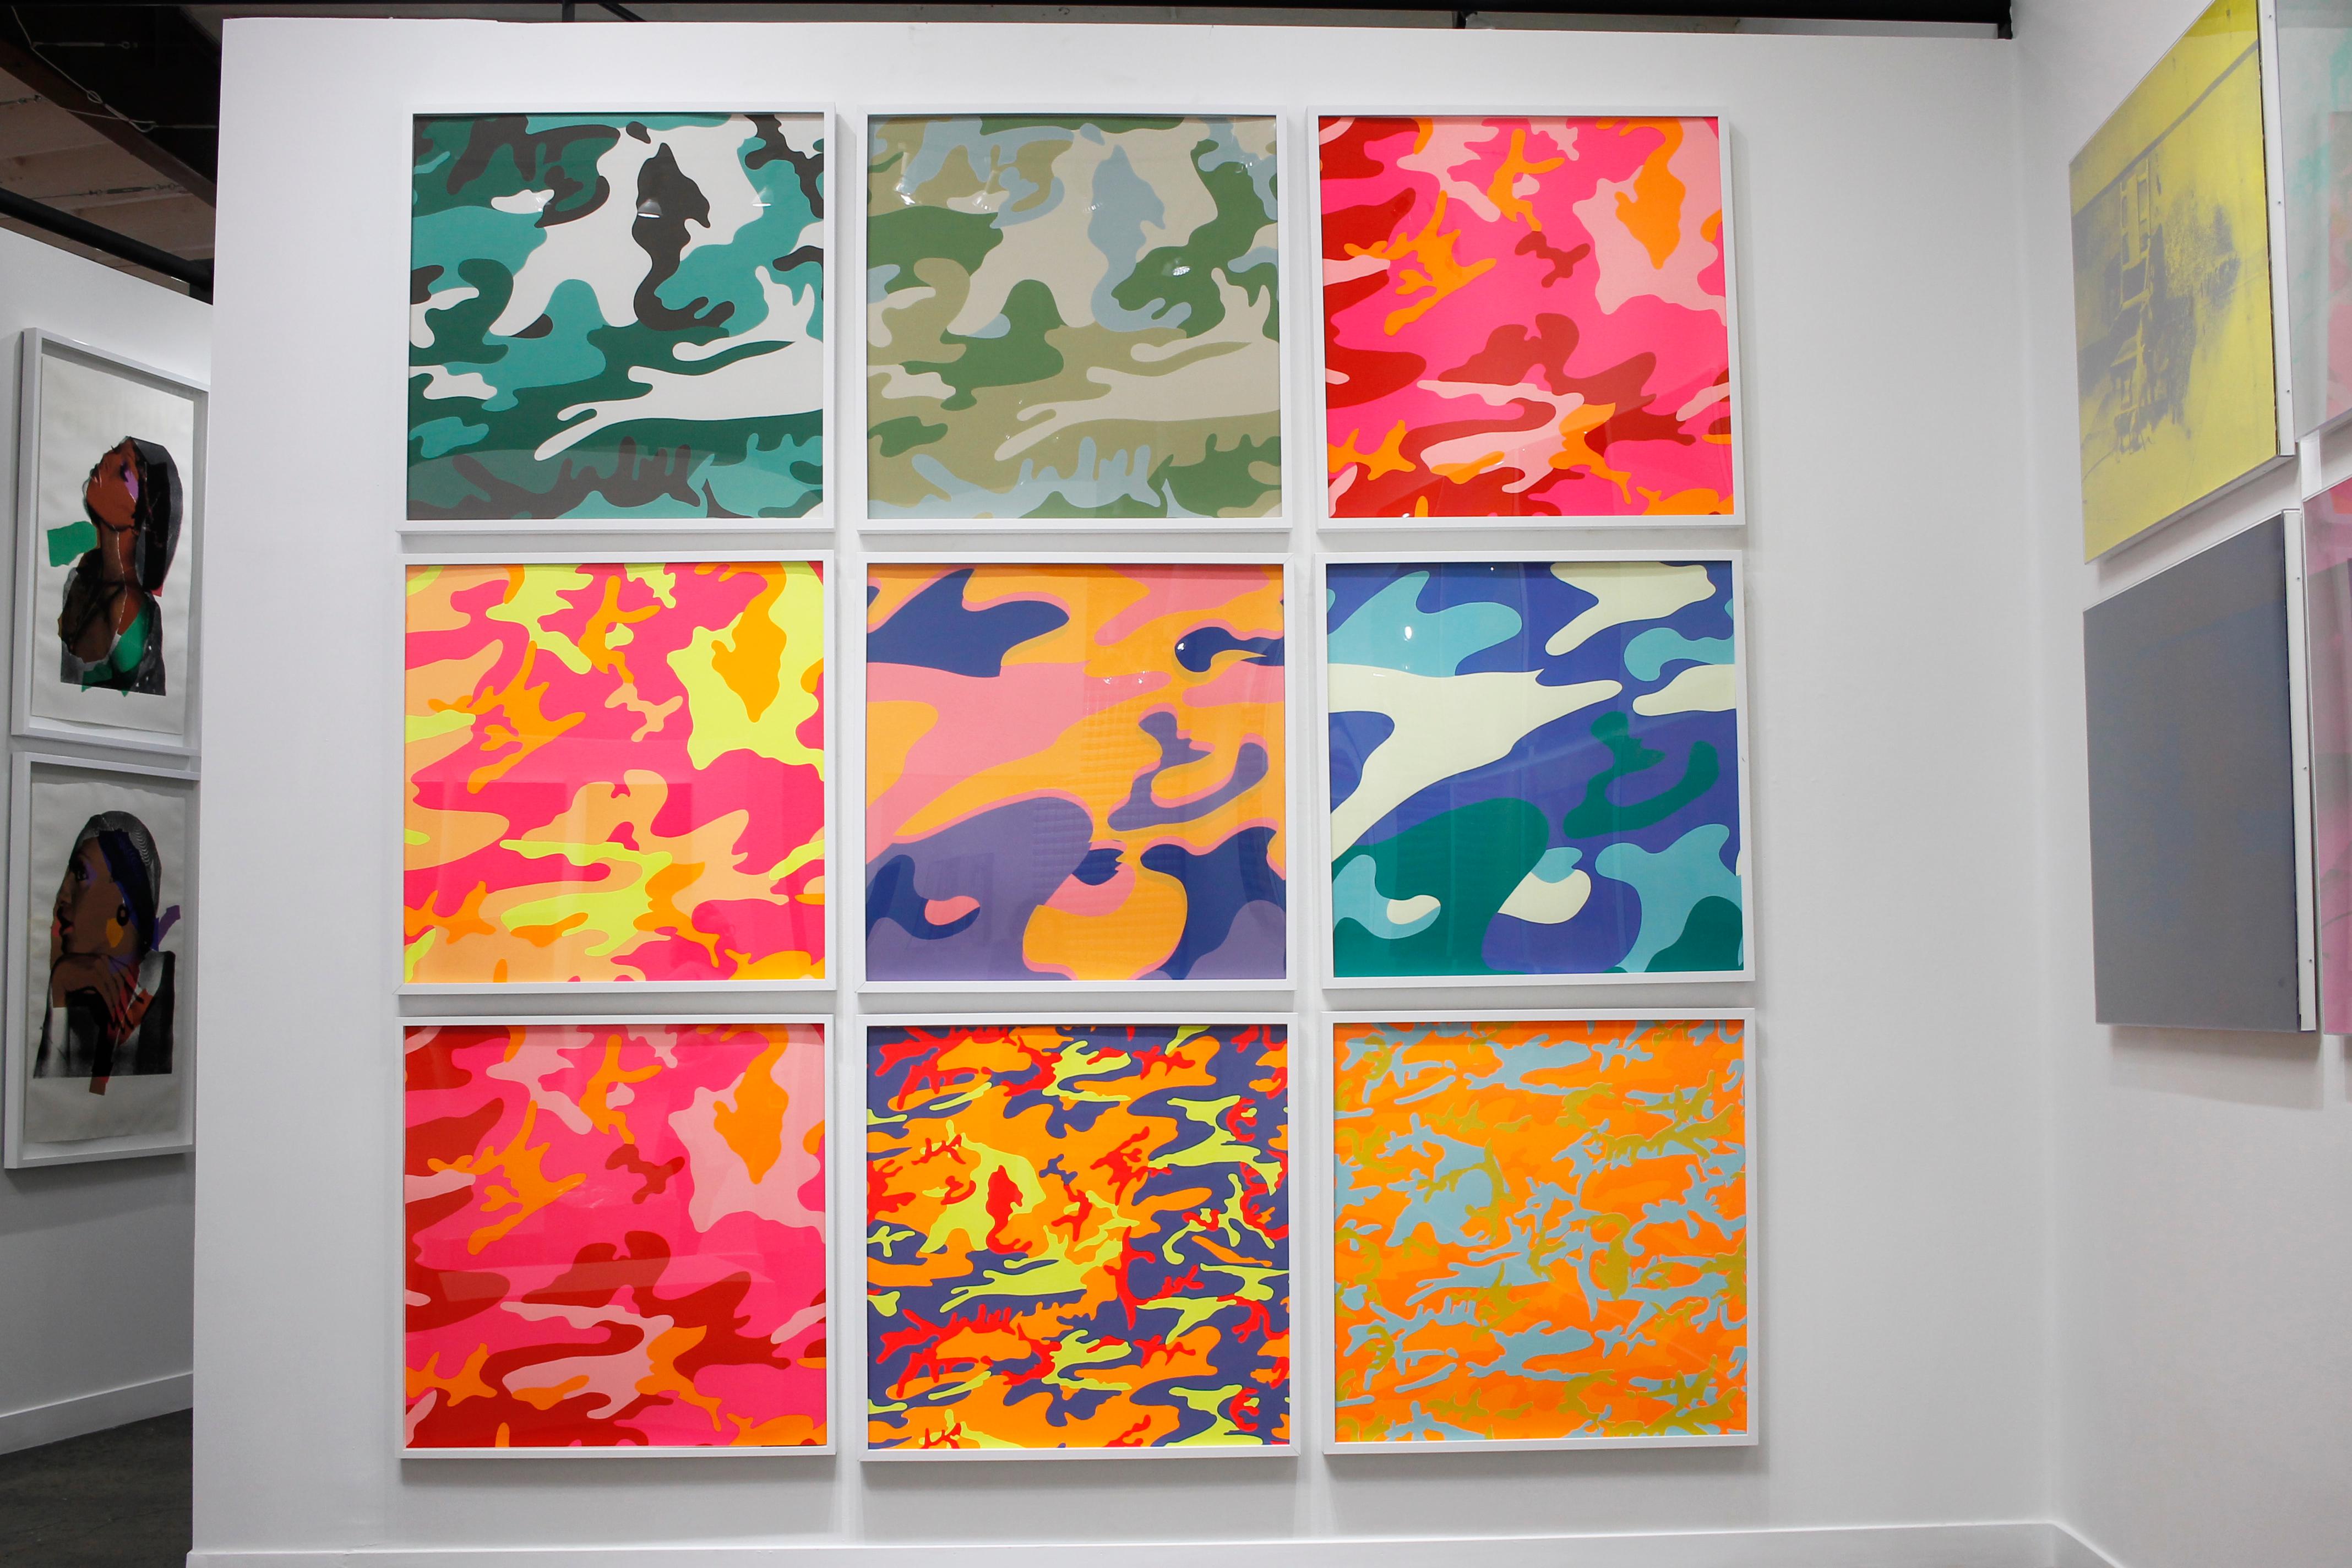 From the standard edition of 80. The specific edition number will only be provided to the buyer at the actual point of sale. Please message us to request this information at the point of purchase.

Warhol’s Camouflage portfolio of 8 screen prints